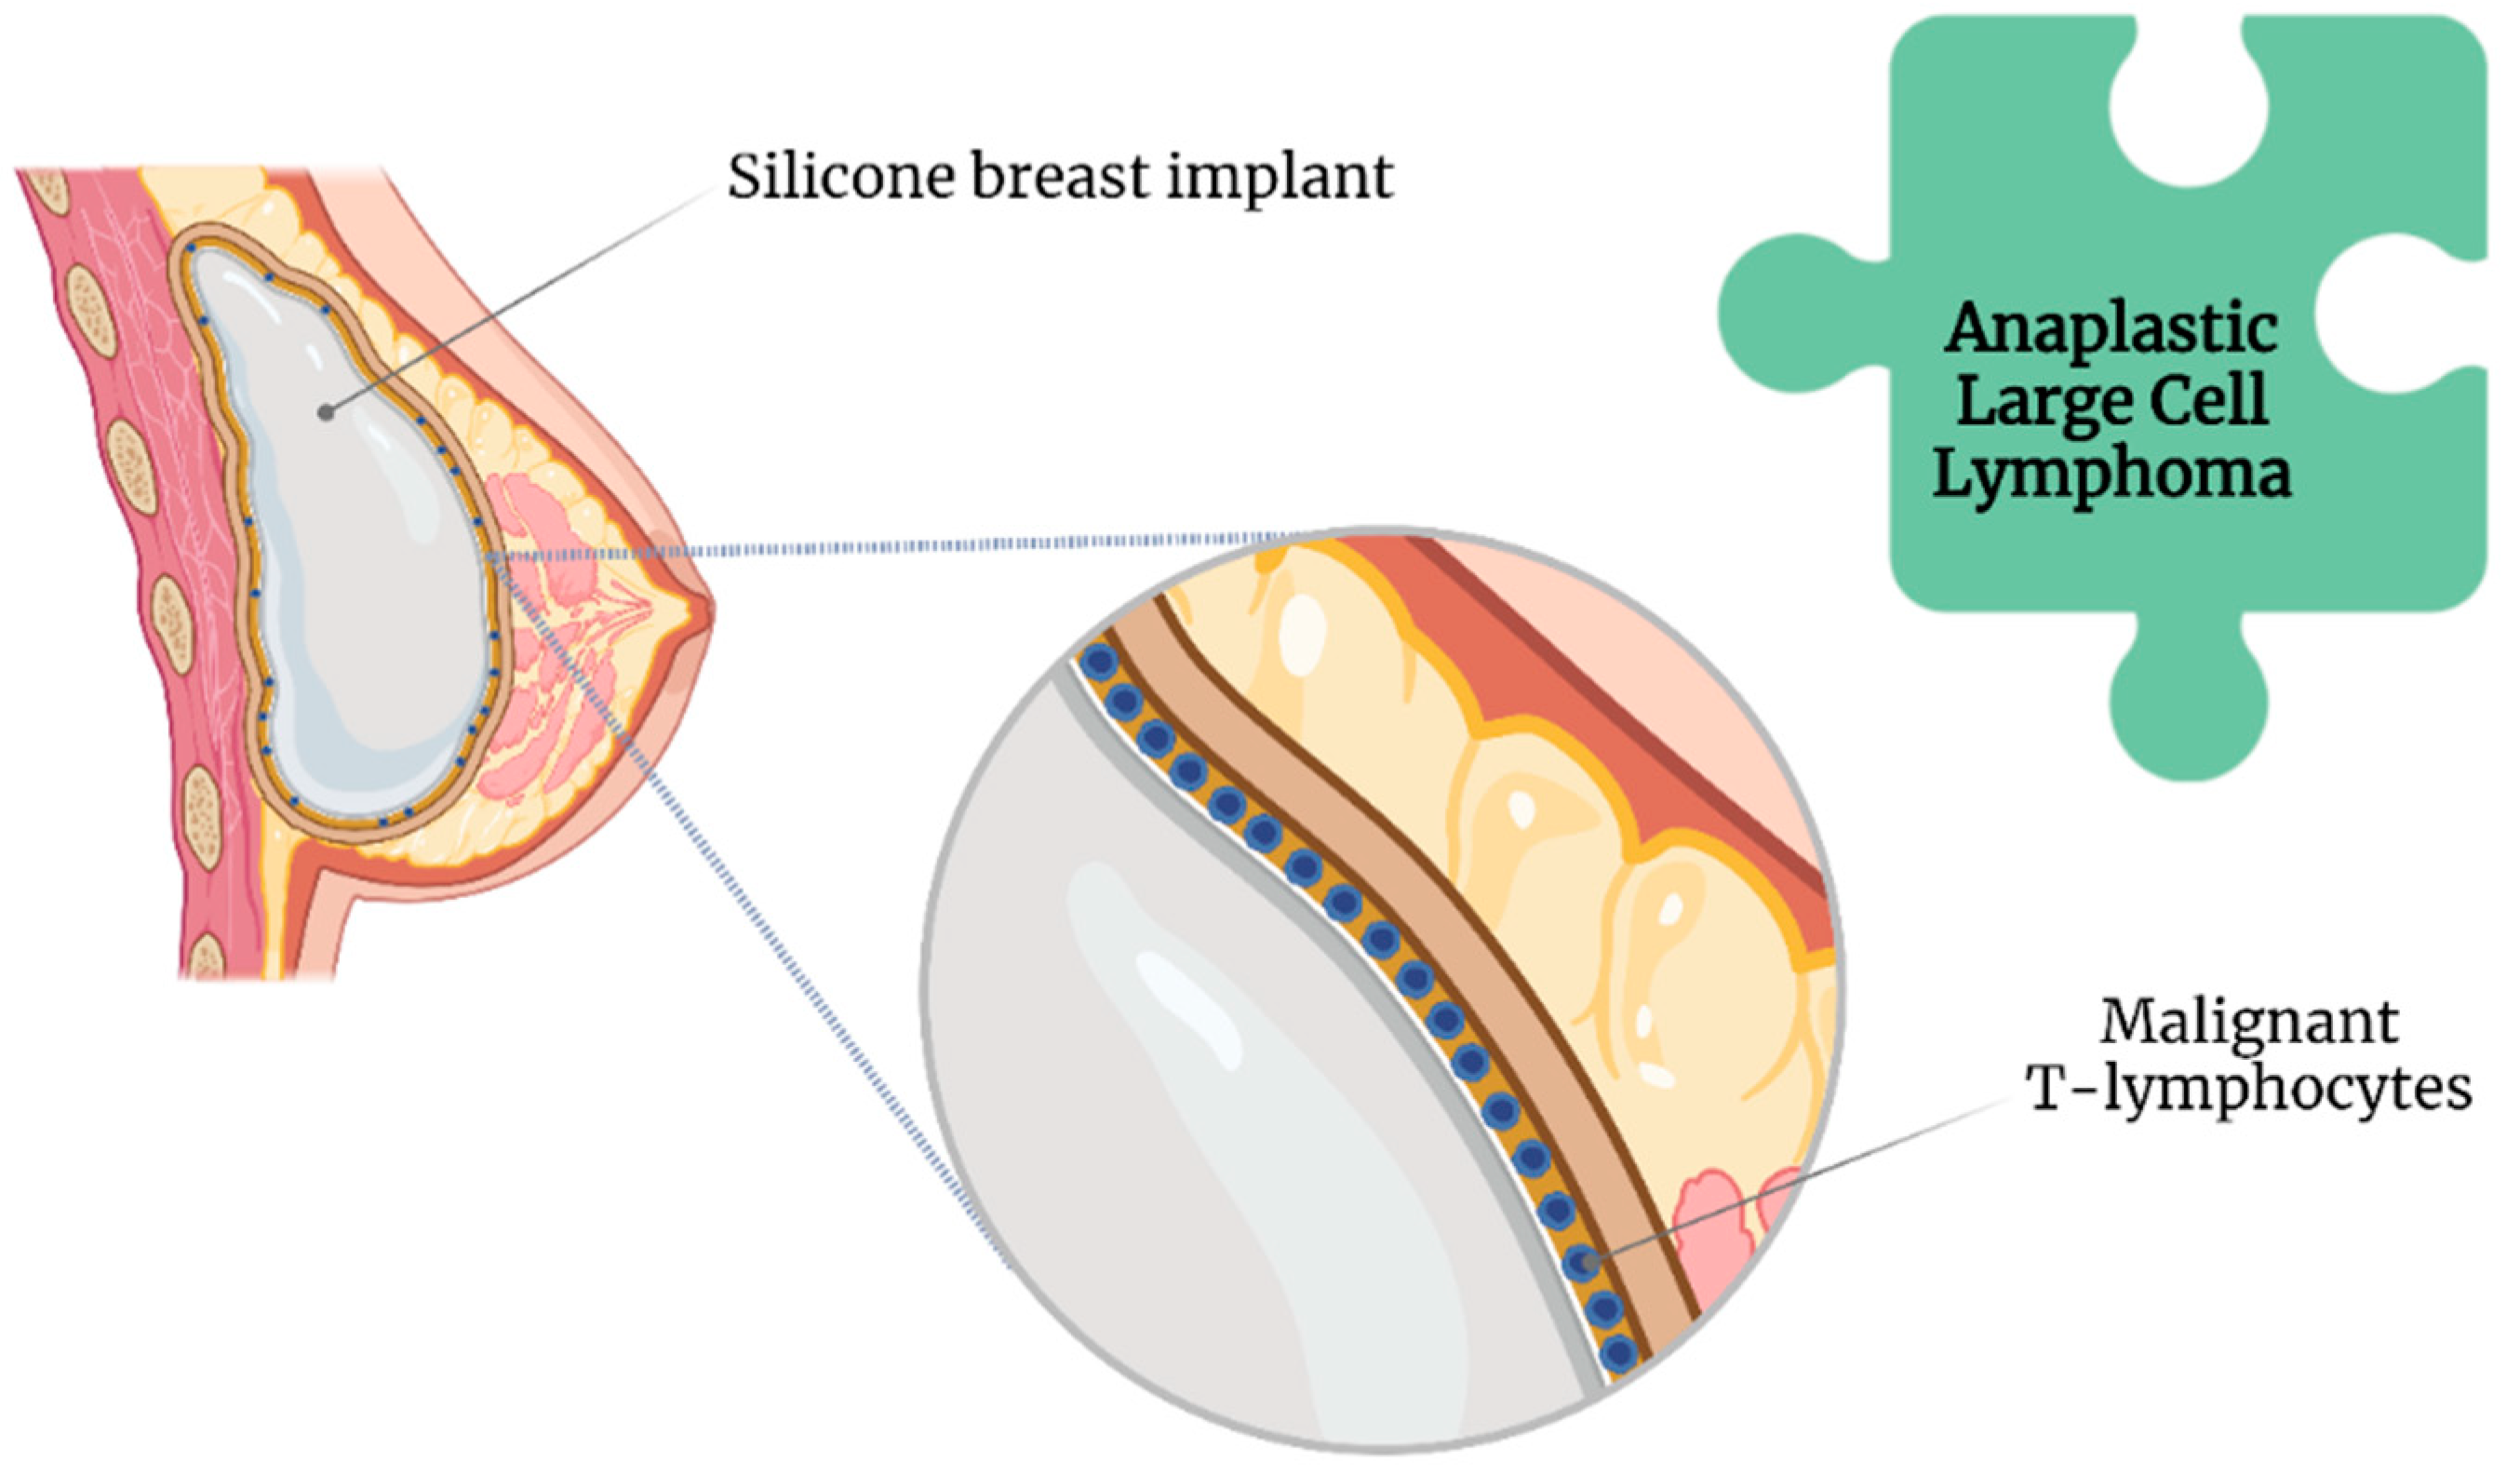 From supersized to a more natural look: The evolution of breast implants